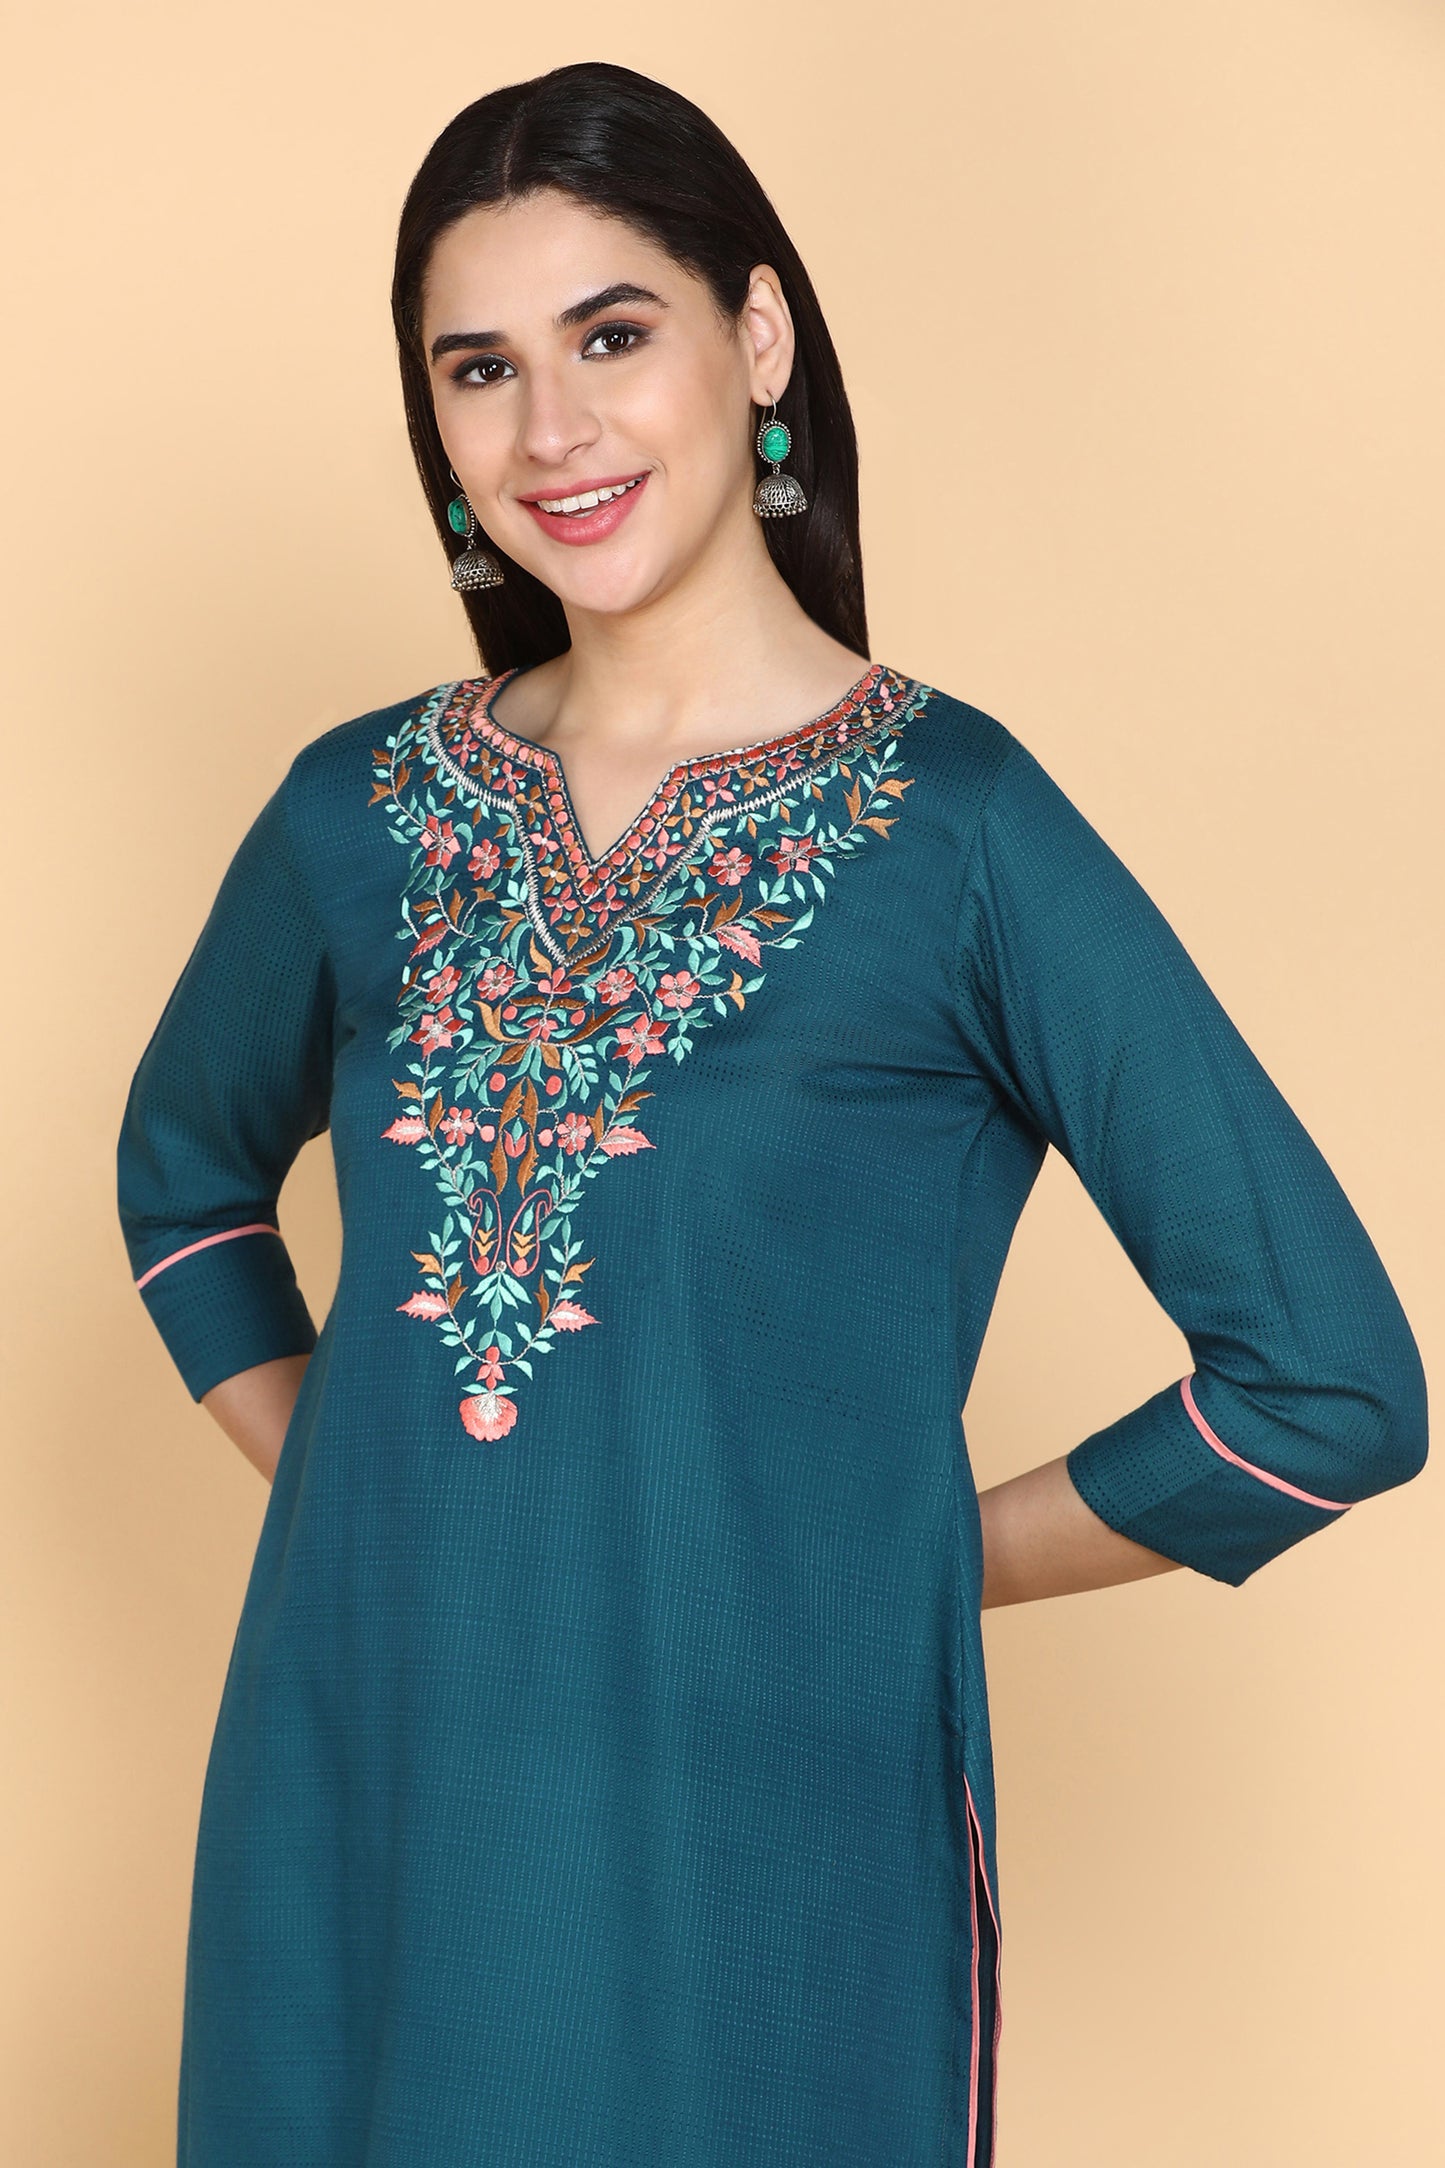 Teal Blue Embroidered Kurta With Palazzo Pants